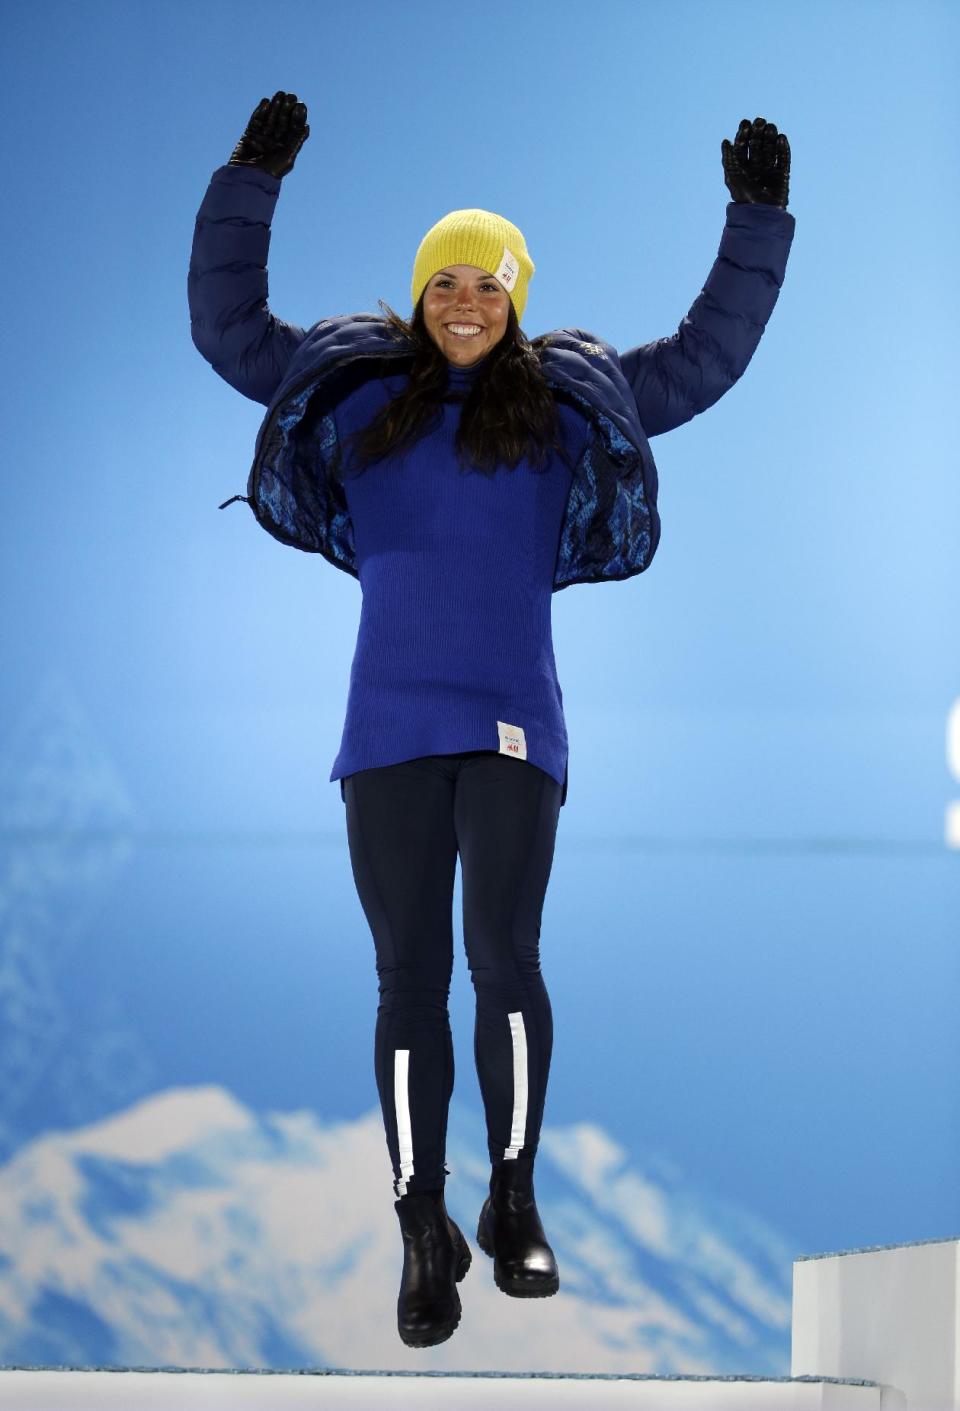 Charlotte Kalla of Sweden, the silver medalist in the women's cross-country 10K classical race, jumps on the podium during the medals ceremony at the 2014 Winter Olympics, Thursday, Feb. 13, 2014, in Sochi, Russia. (AP Photo/David Goldman)